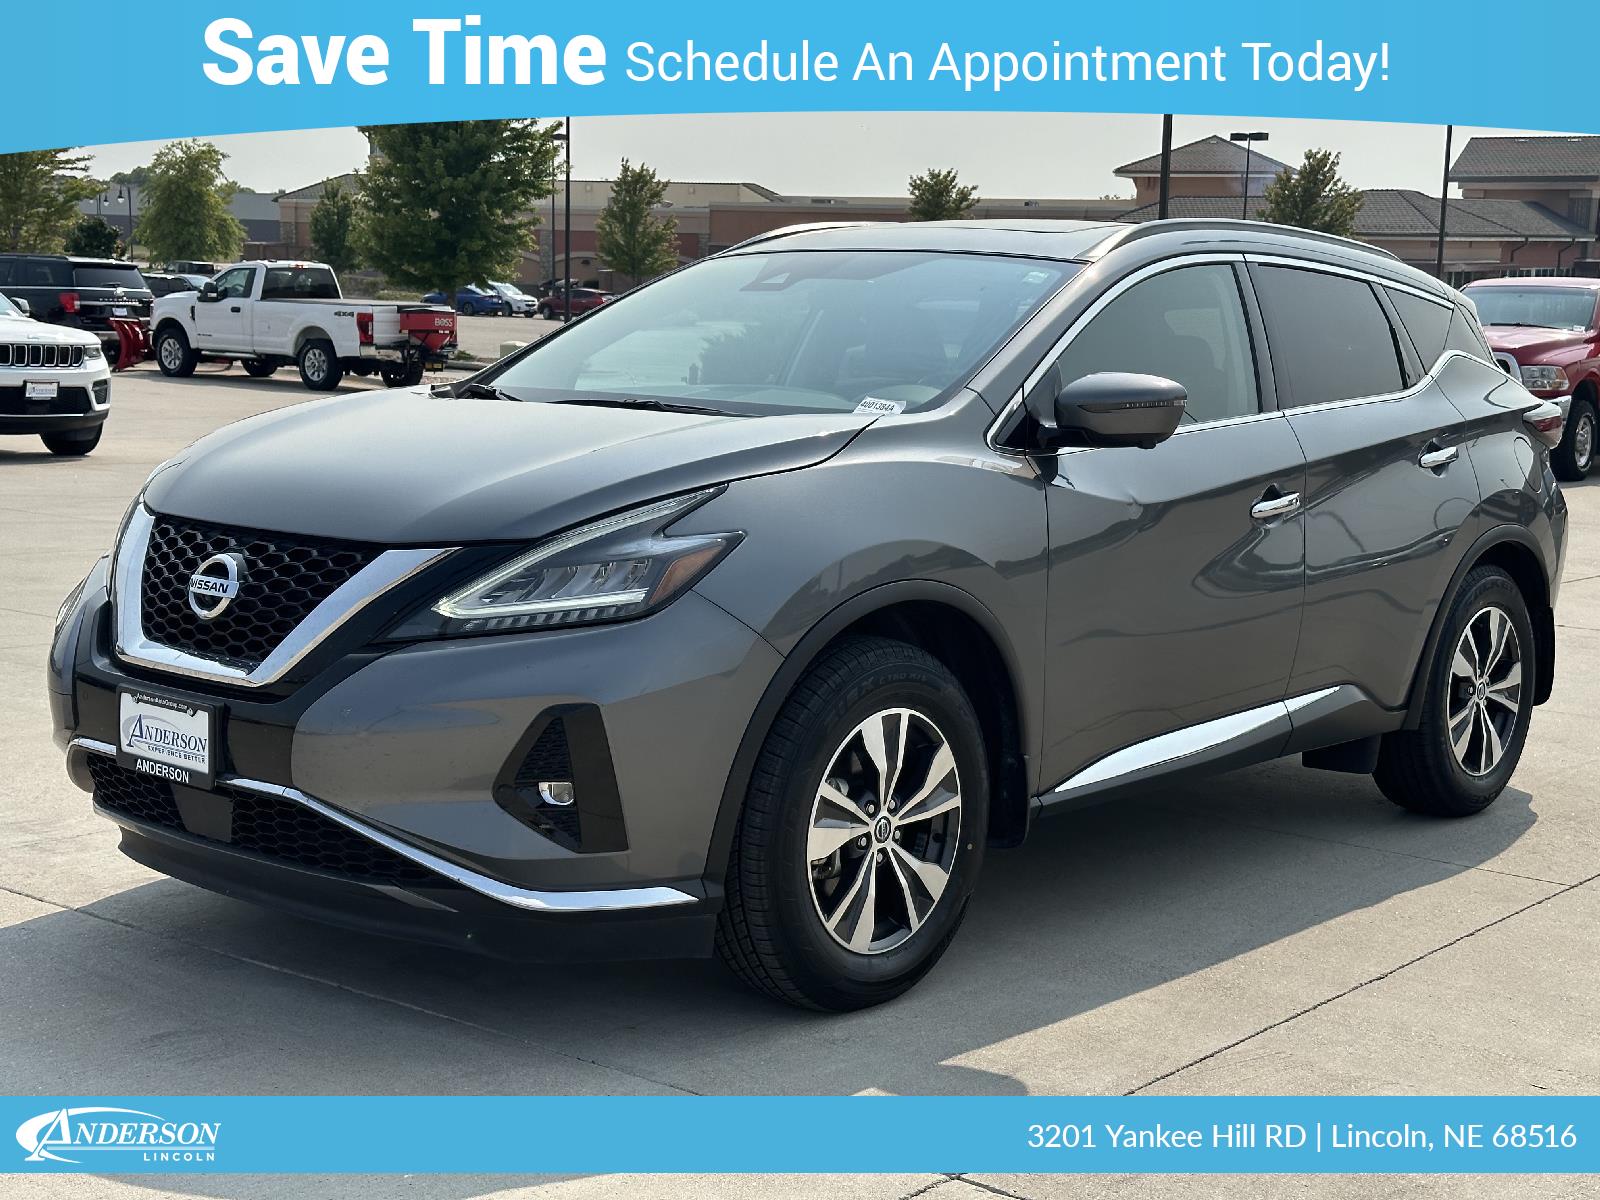 Used 2020 Nissan Murano SV Stock: 4001384A